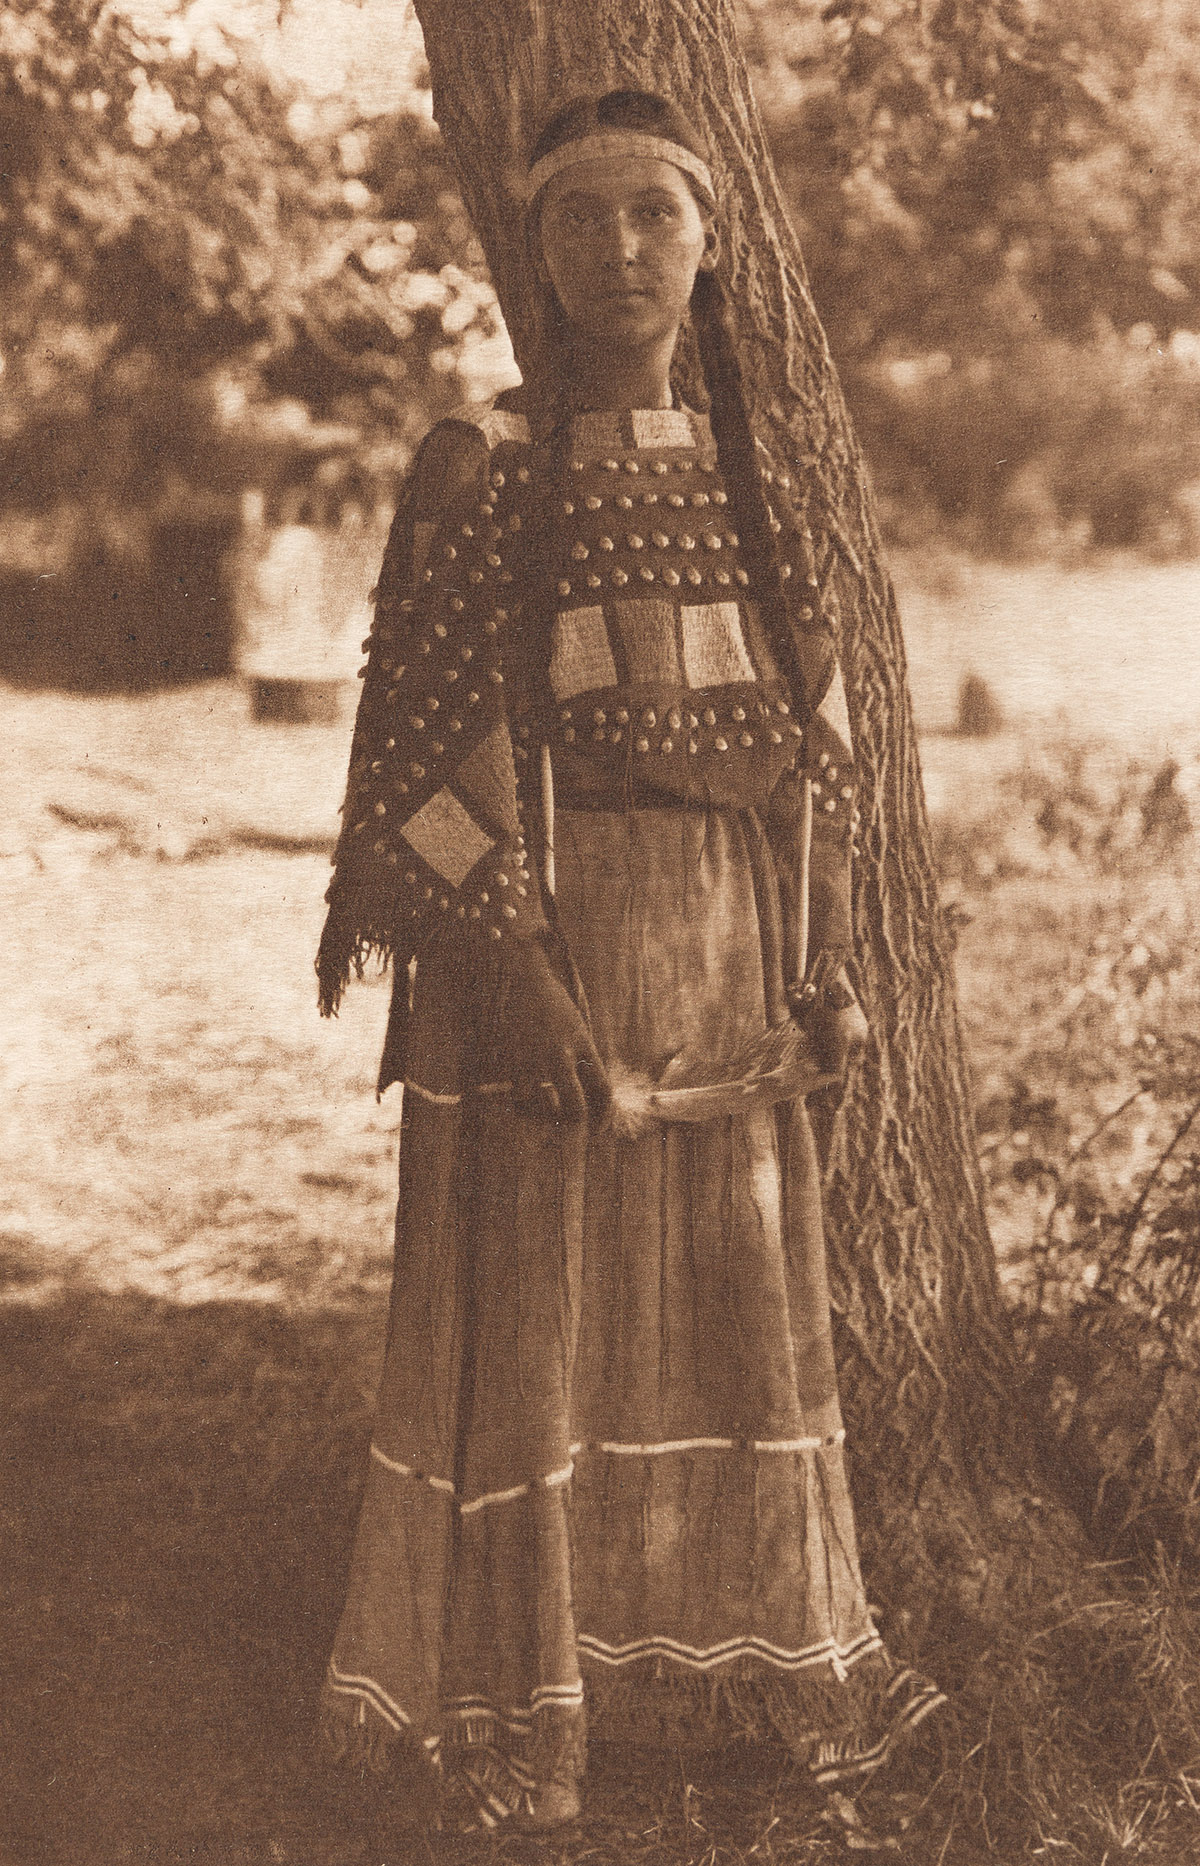 EDWARD S. CURTIS. The North American Indian. Volume III.